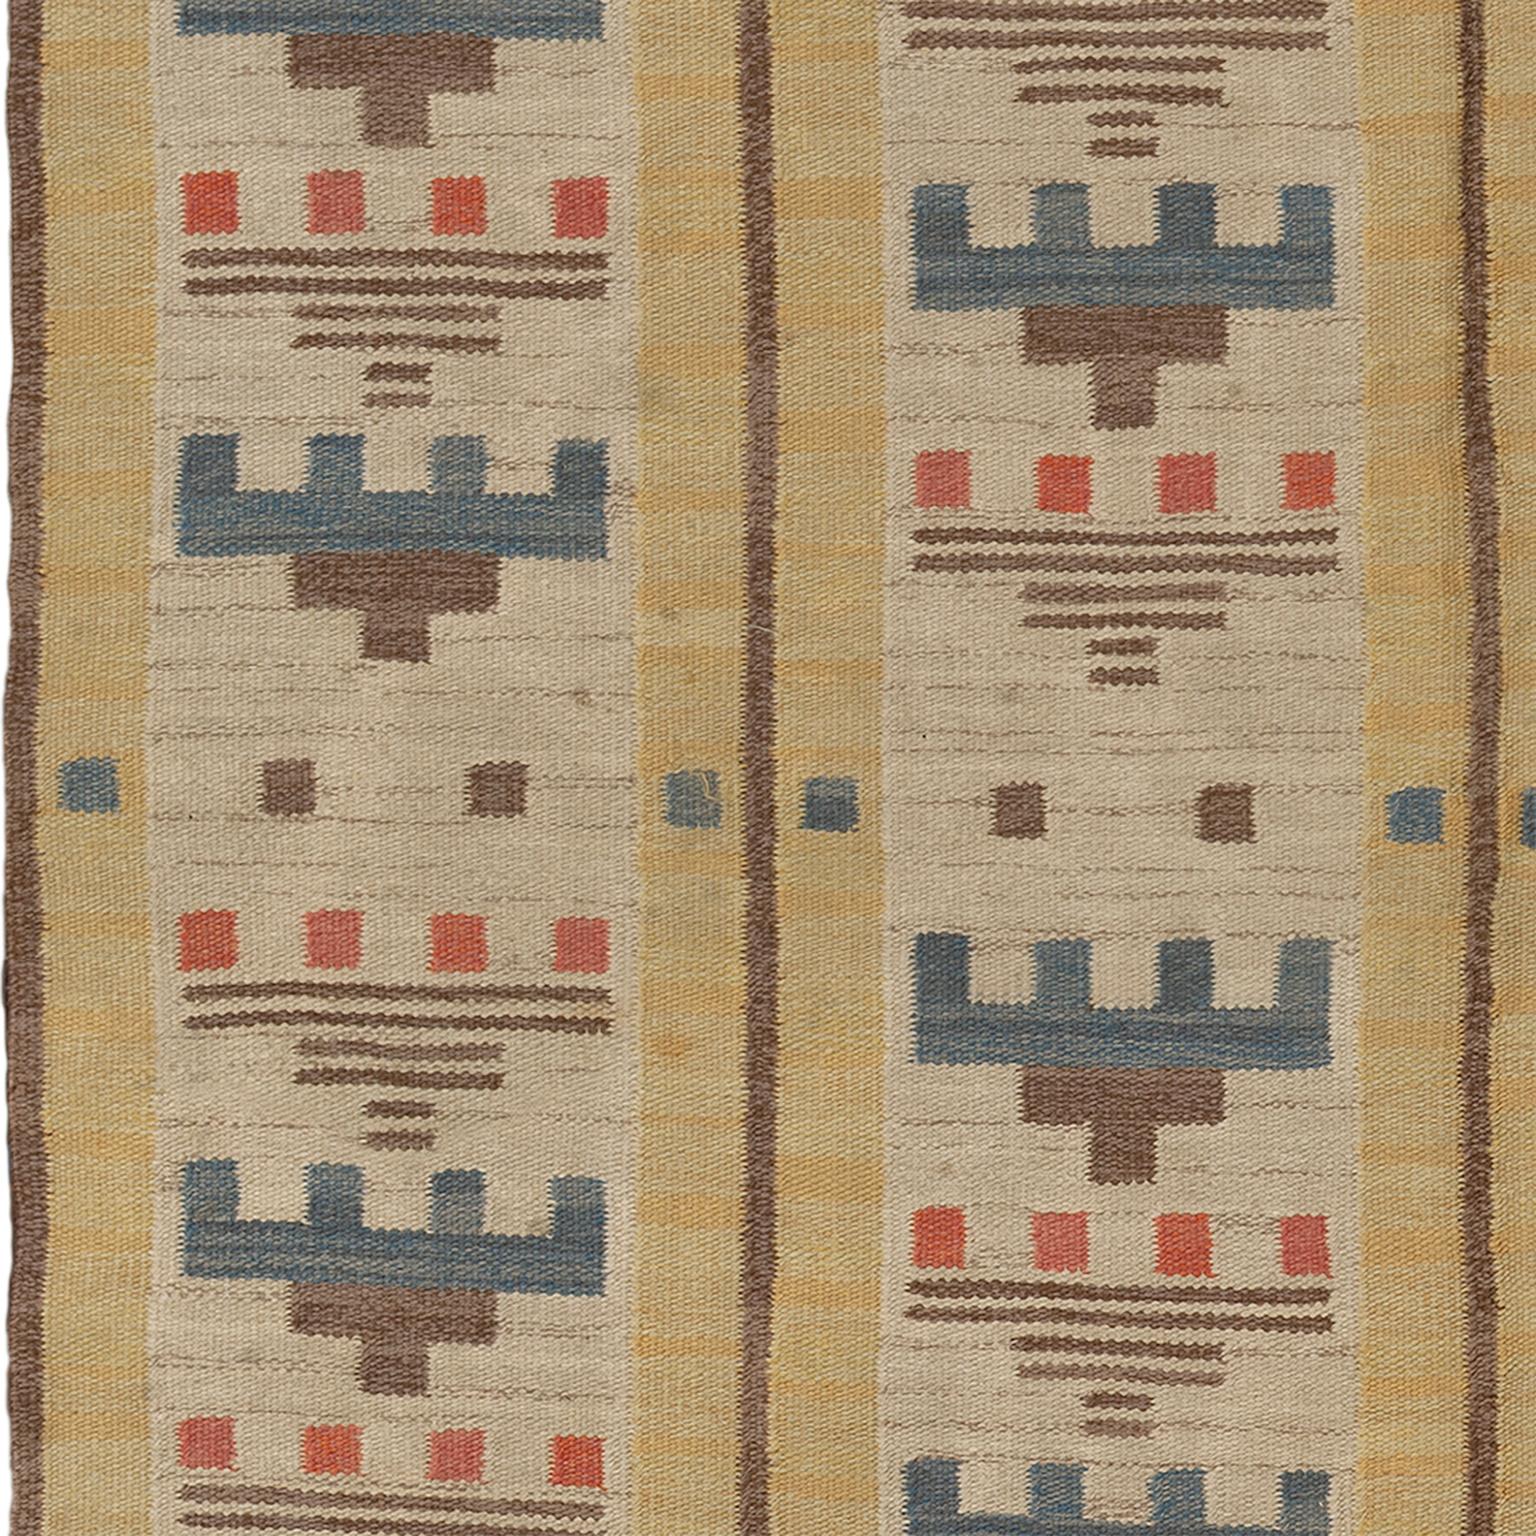 Mid 20th Century Swedish Flat Weave Rug In Good Condition For Sale In New York, NY